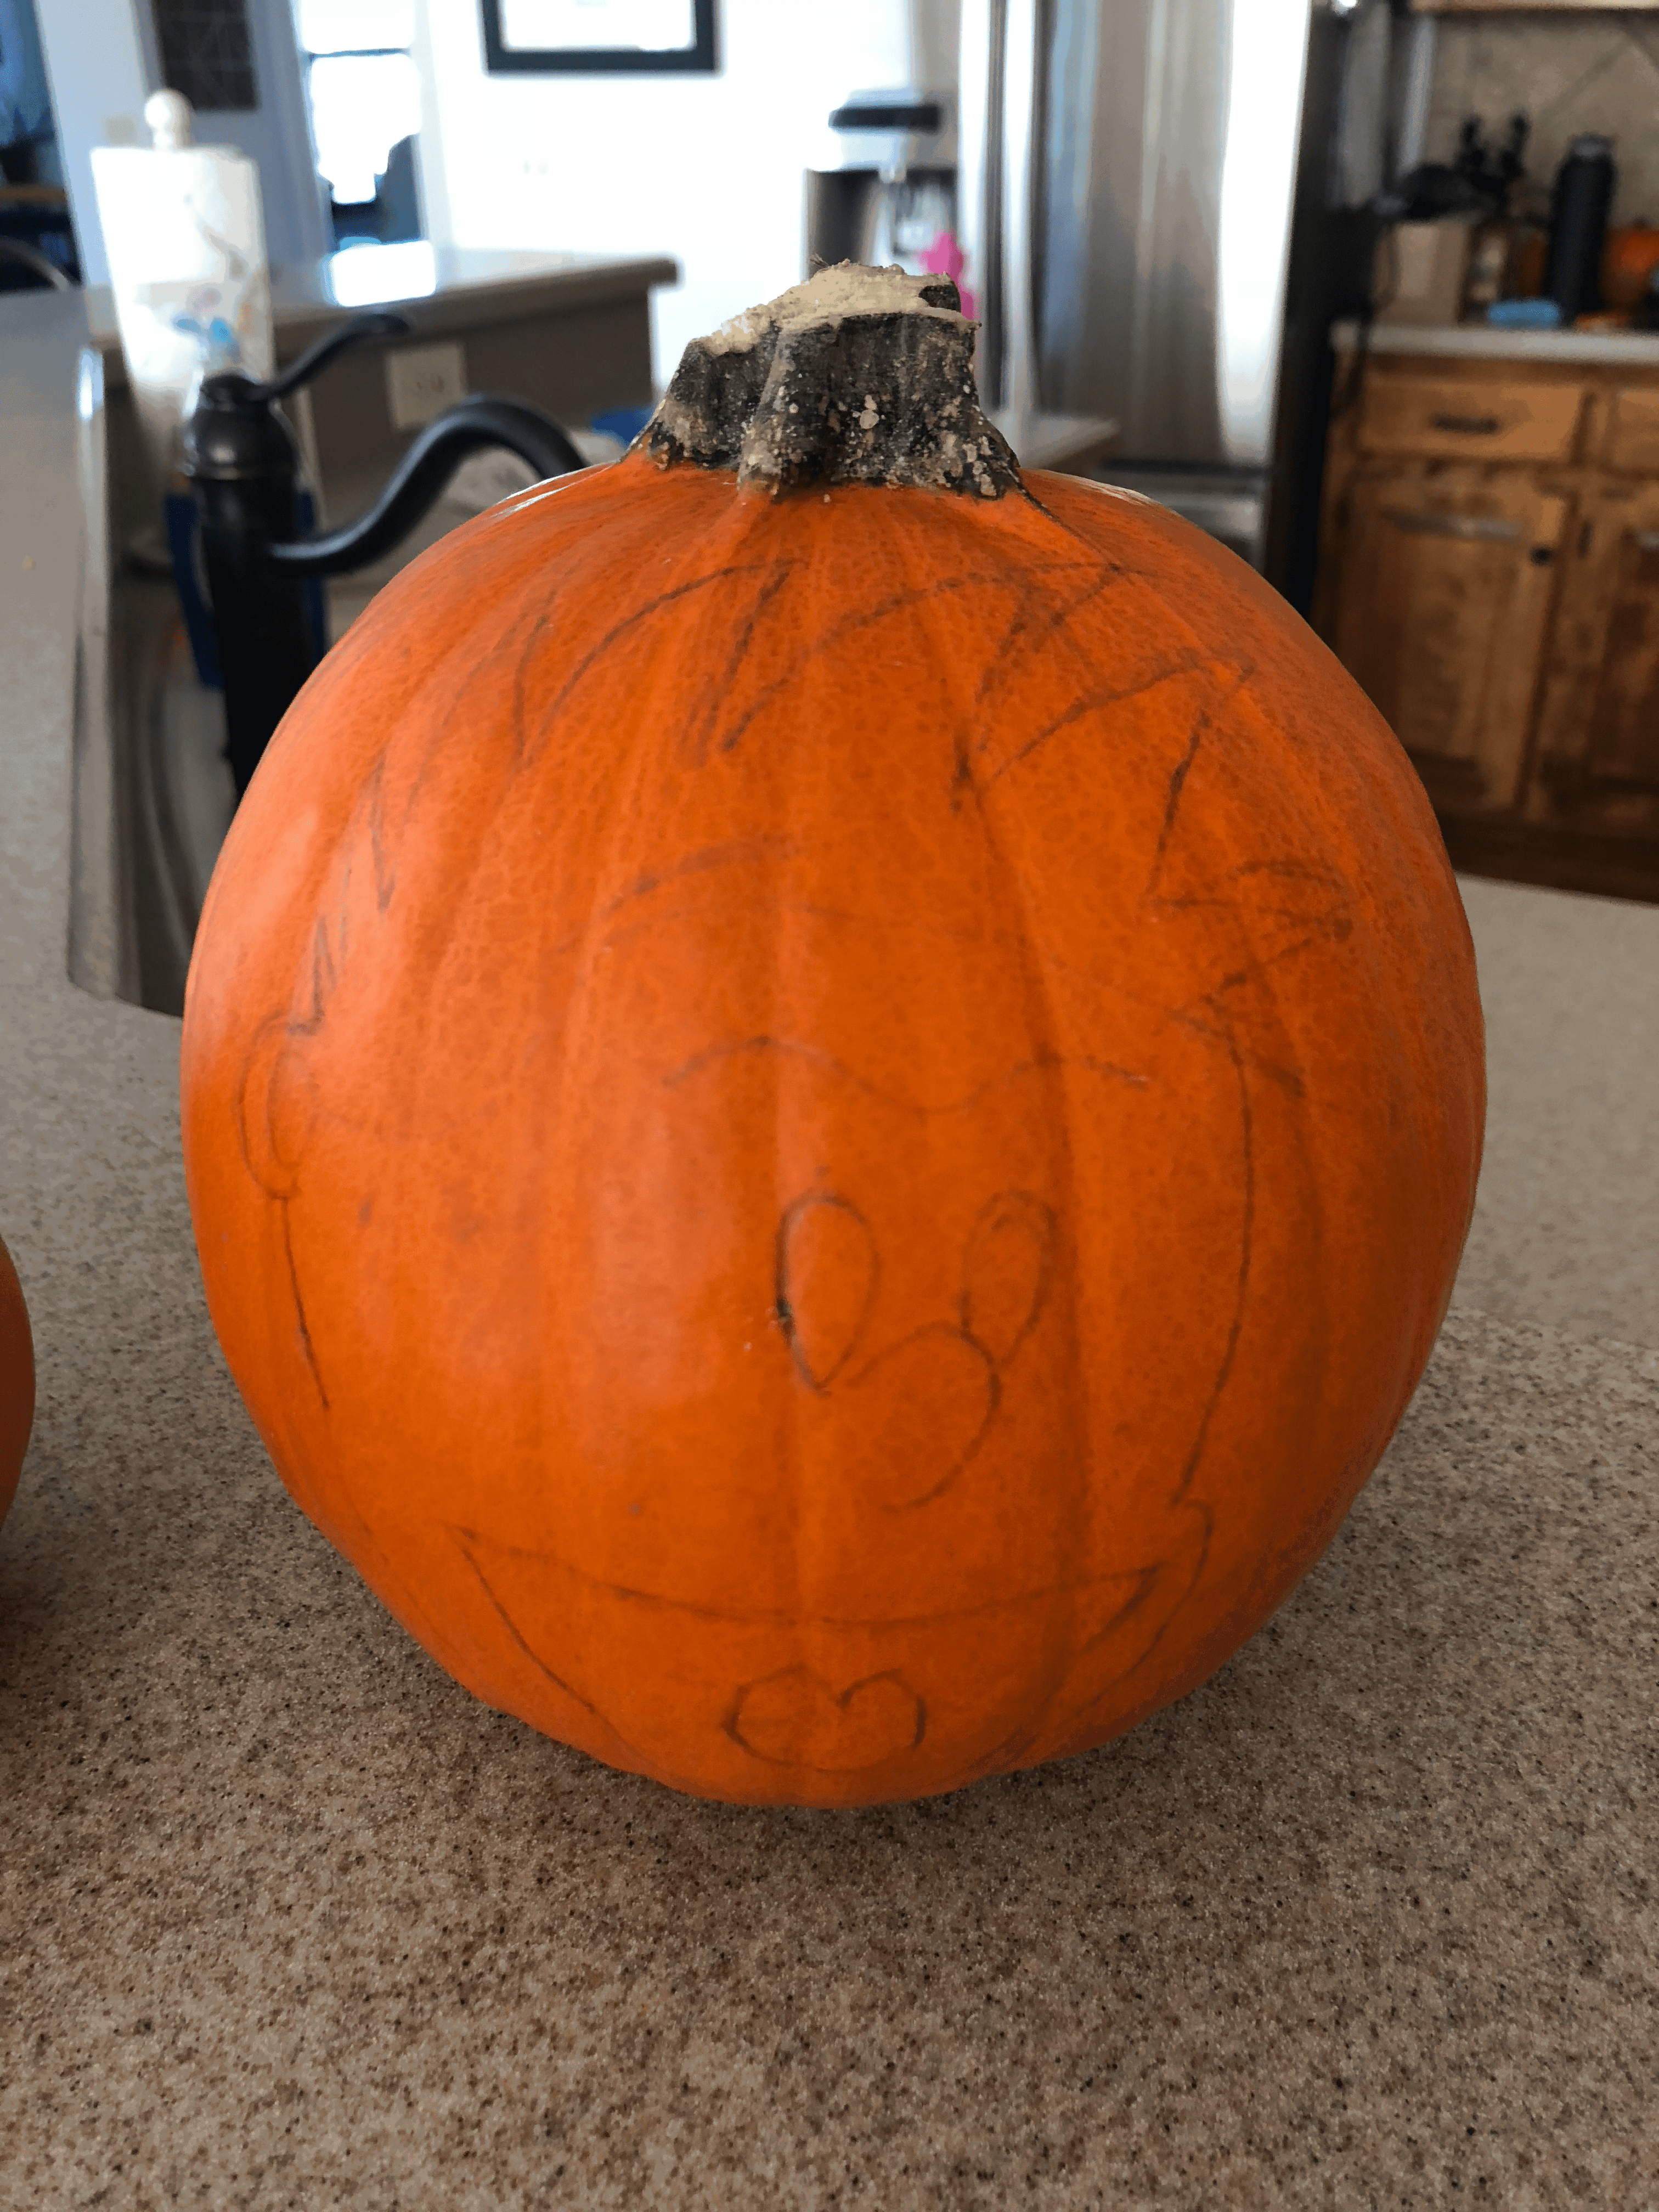 pencil drawing on pumpkin to outline before painting